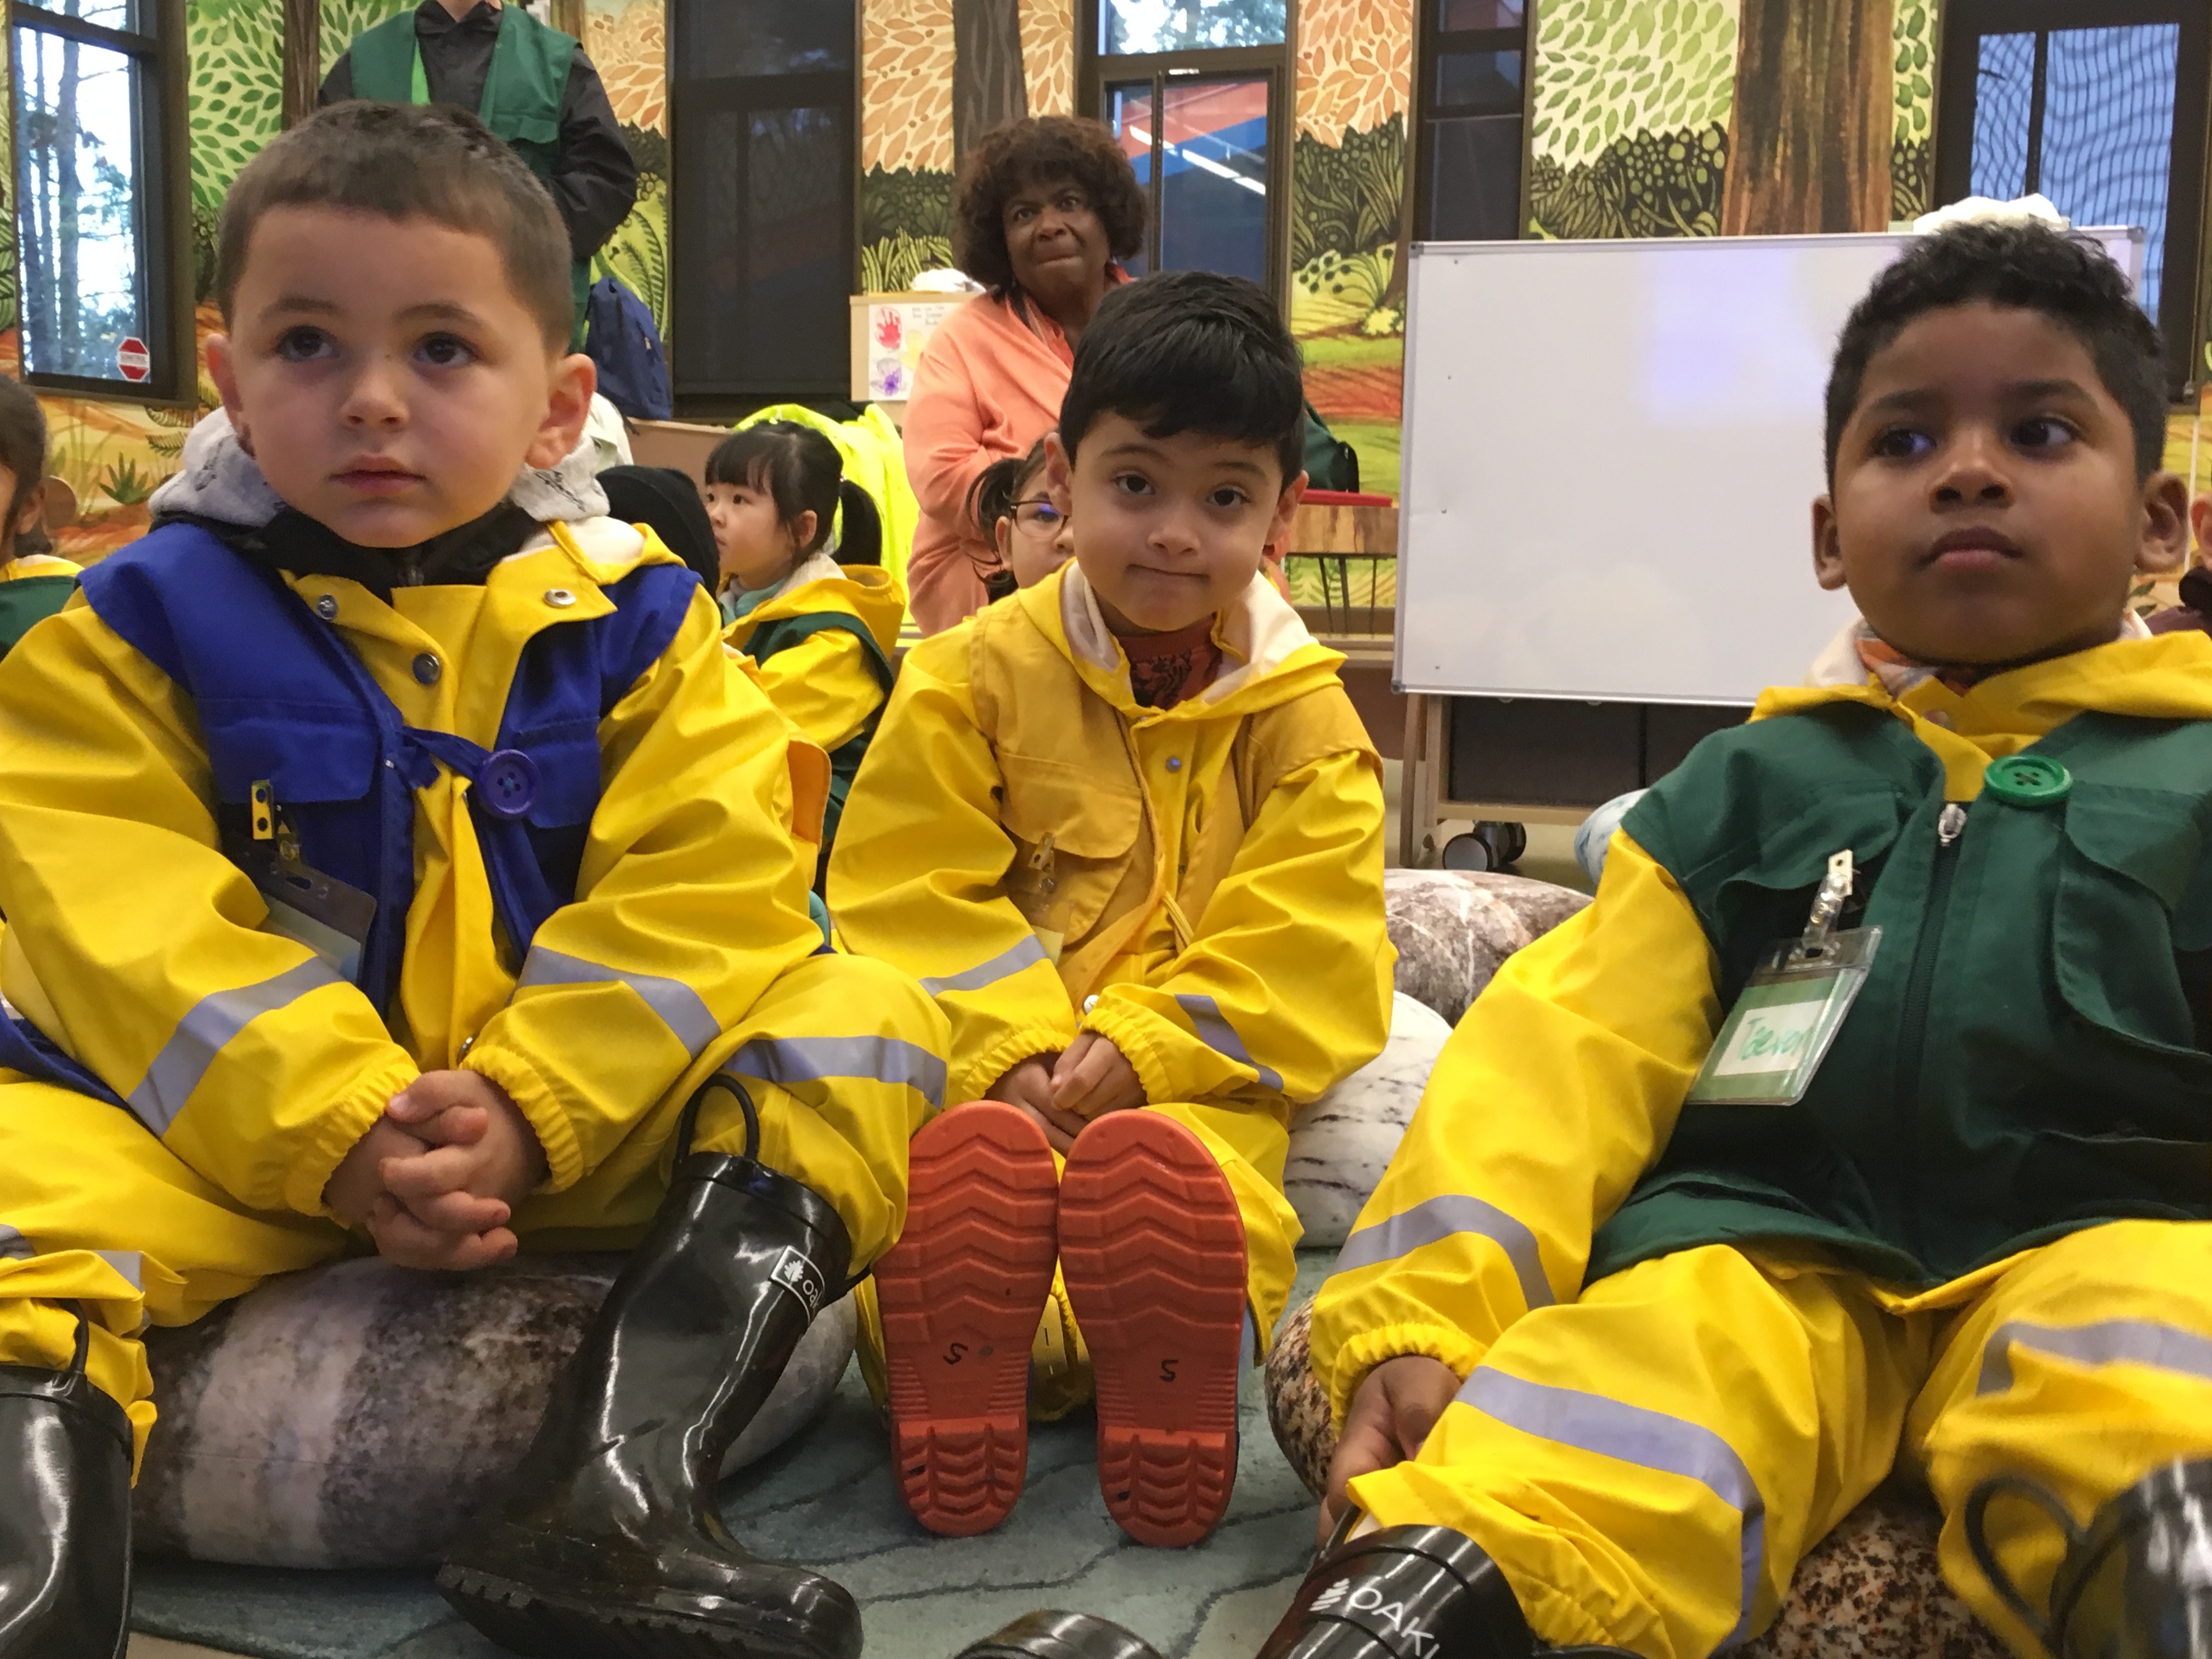 NATURAL CURIOSITY—Superintendent Carla Santorno looks on as visiting preschool students prepare for a nature hike in the rain at the Science and Math Institute, also known as SAMI, which may be the only high school in the nation that’s located inside a zoo.